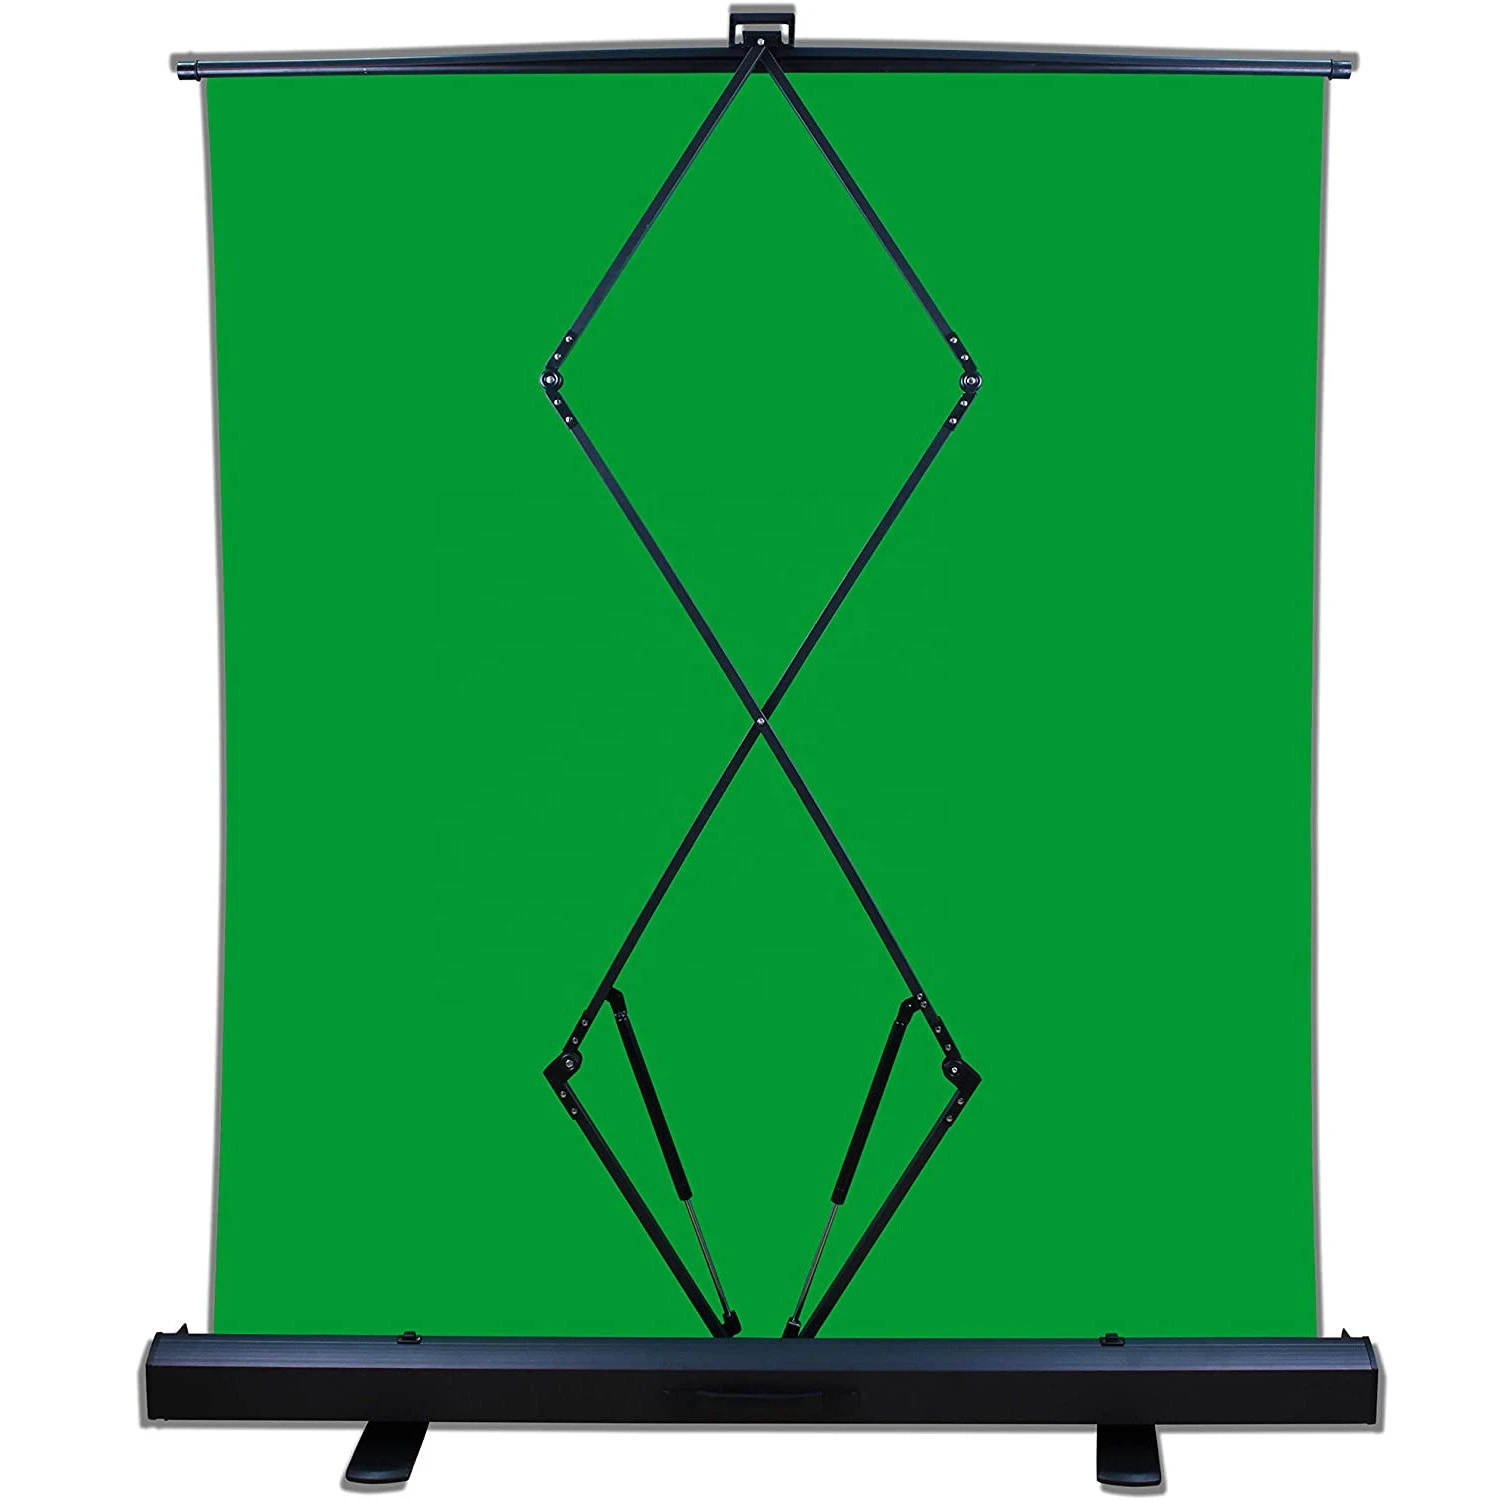 Professional Video Green Screen Backdrop Pull-up Style Portable Collapsible Chroma key Background Panel